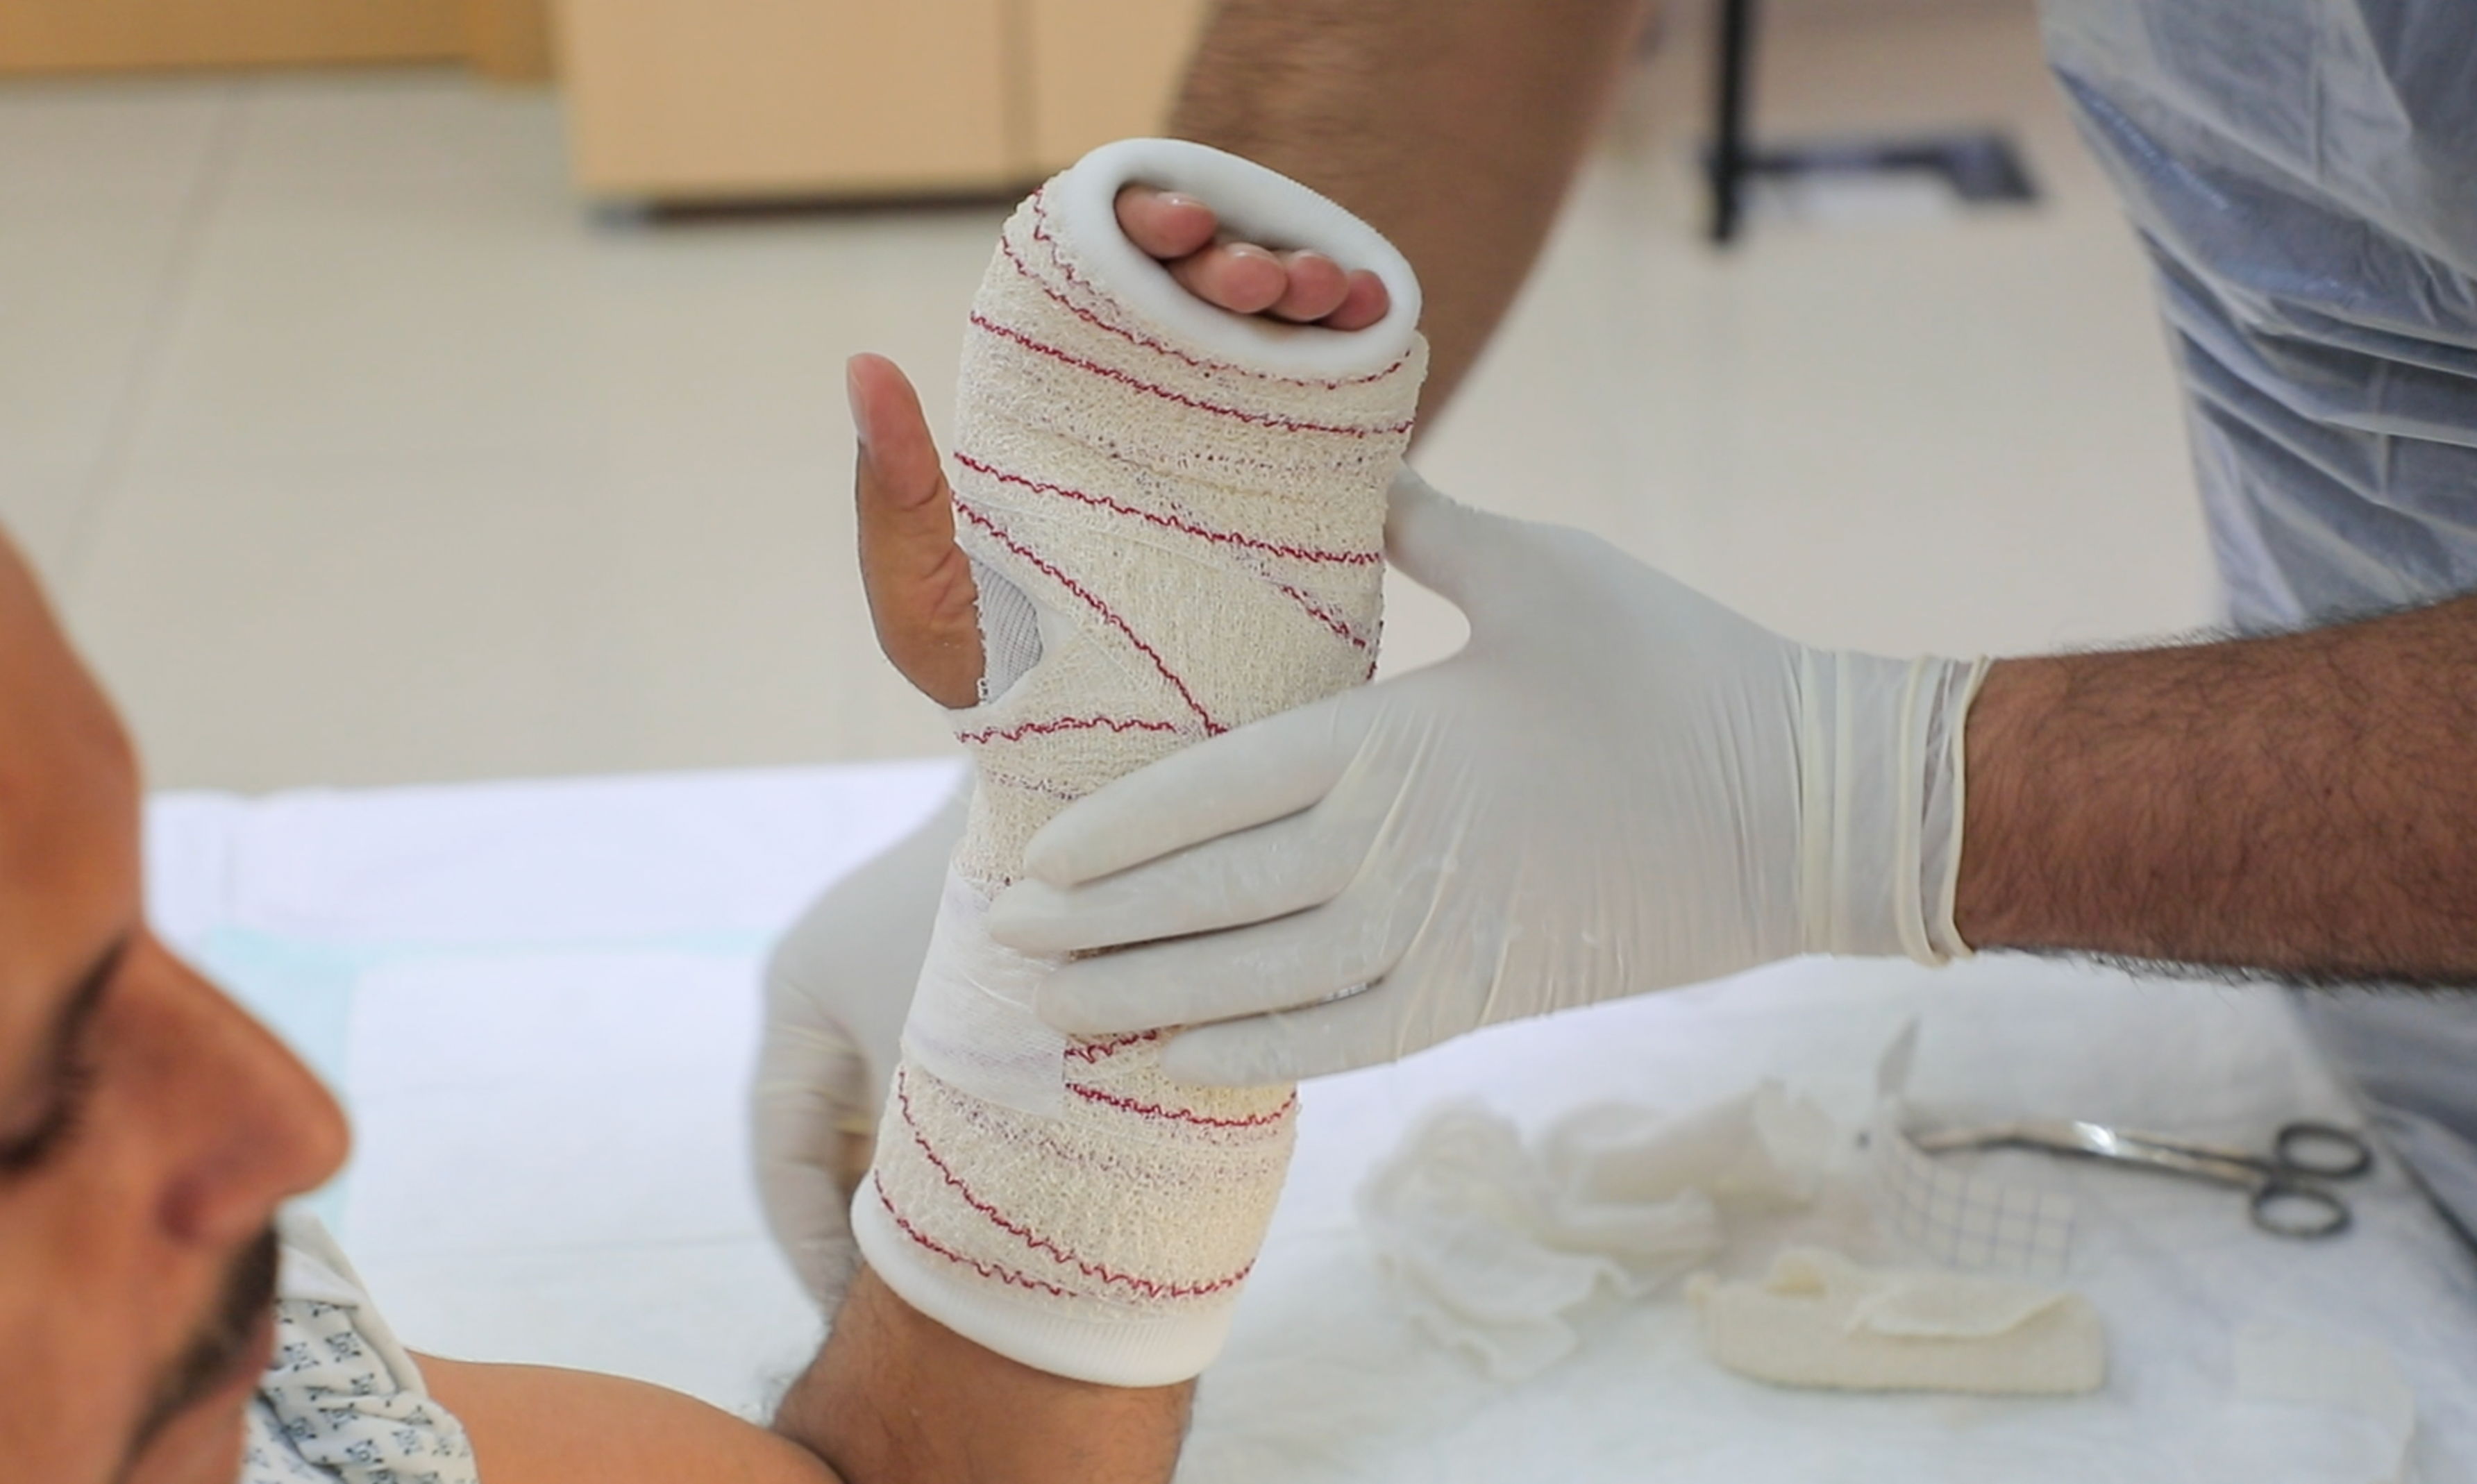 Basic Casting and Splinting Course